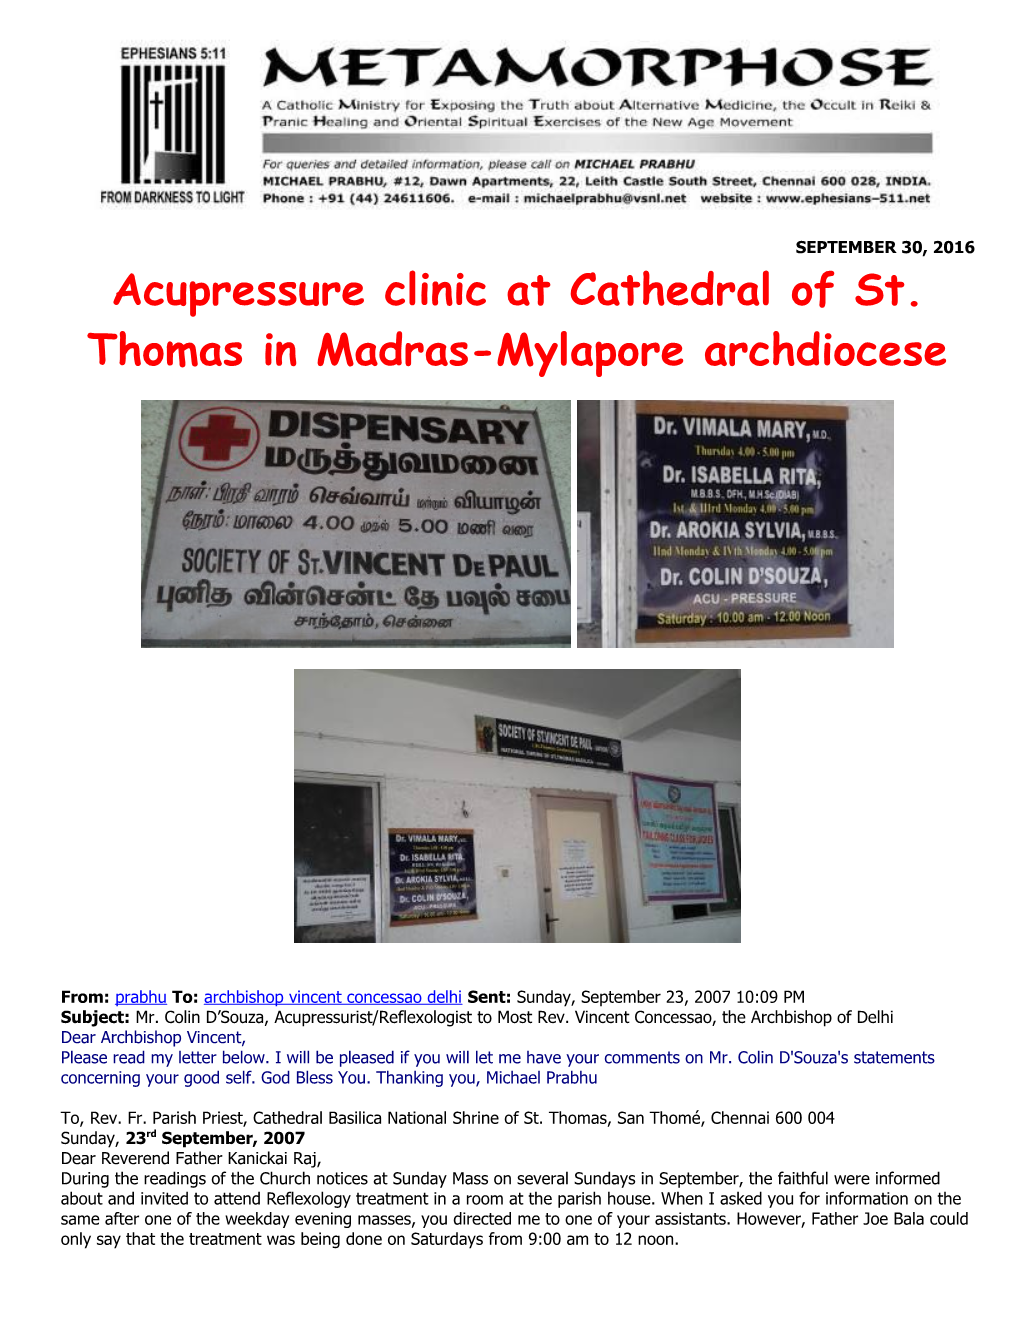 Acupressure Clinic at Cathedral of St. Thomas in Madras-Mylapore Archdiocese